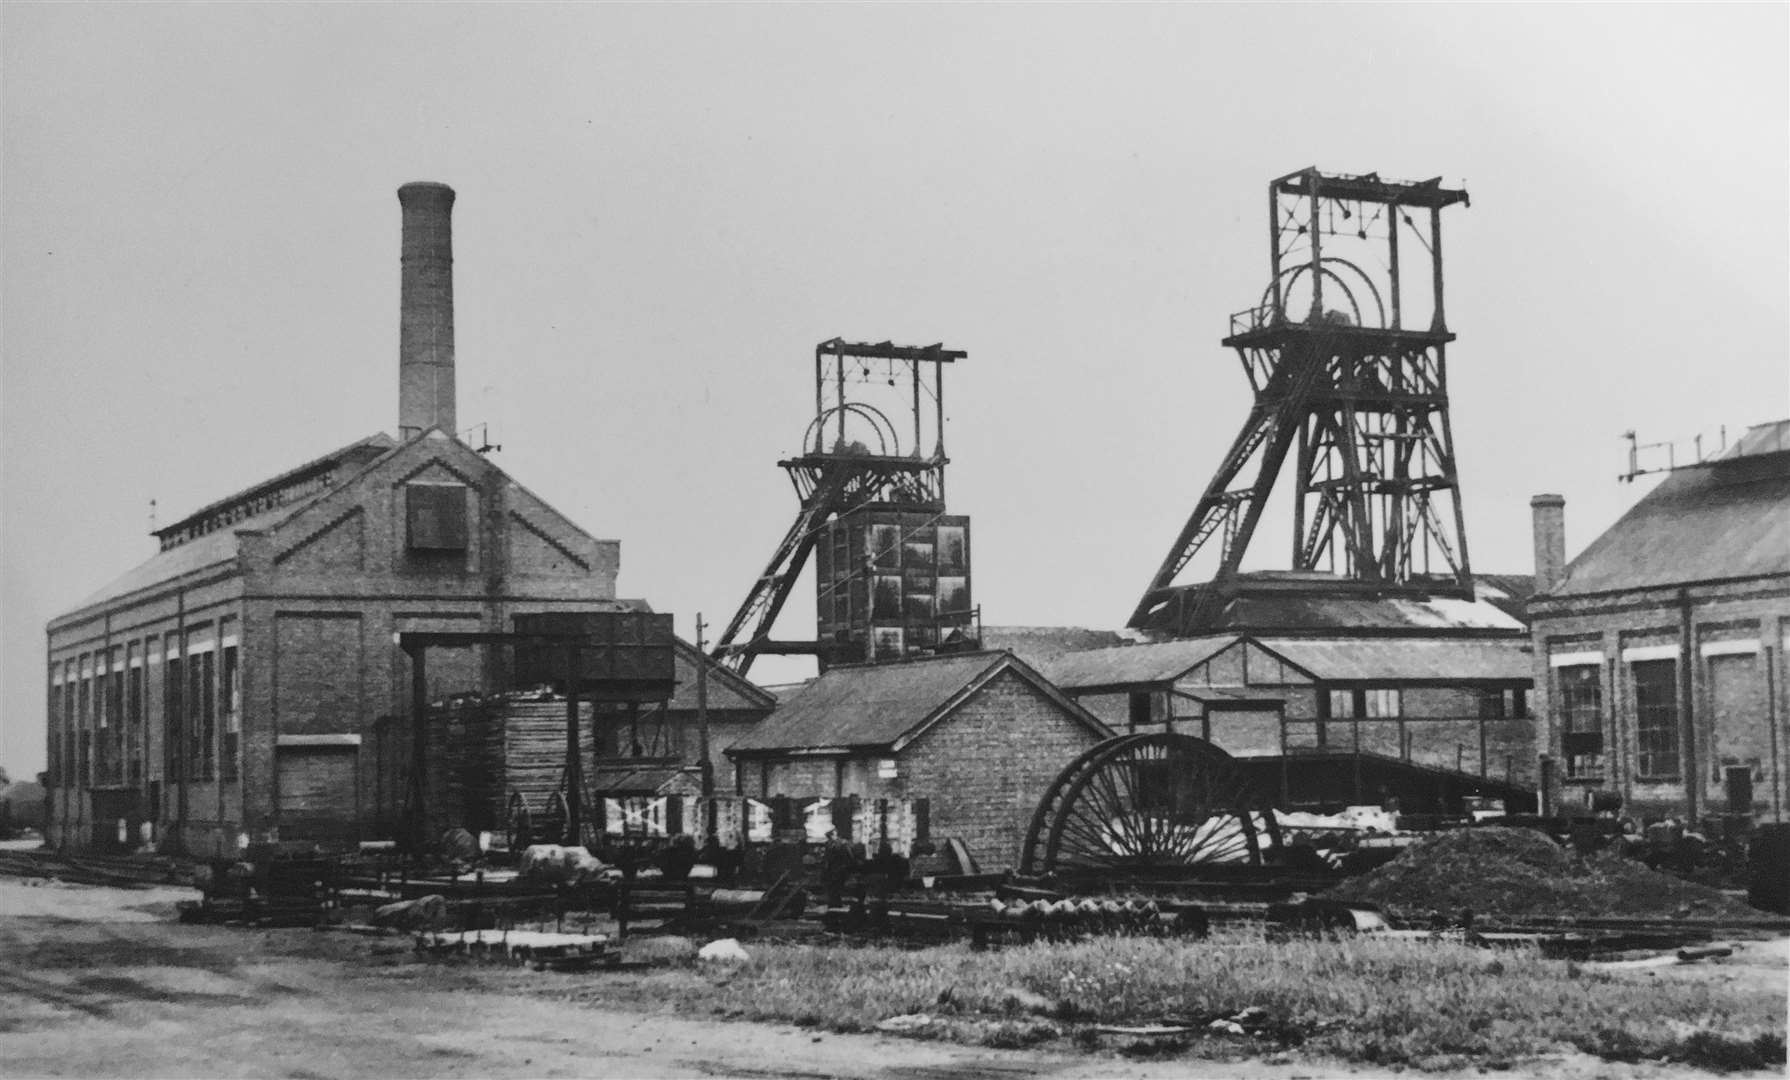 Snowdown Colliery, one of three Kent coal mines that existed during the early 1970s. Picture: Colin Varrall